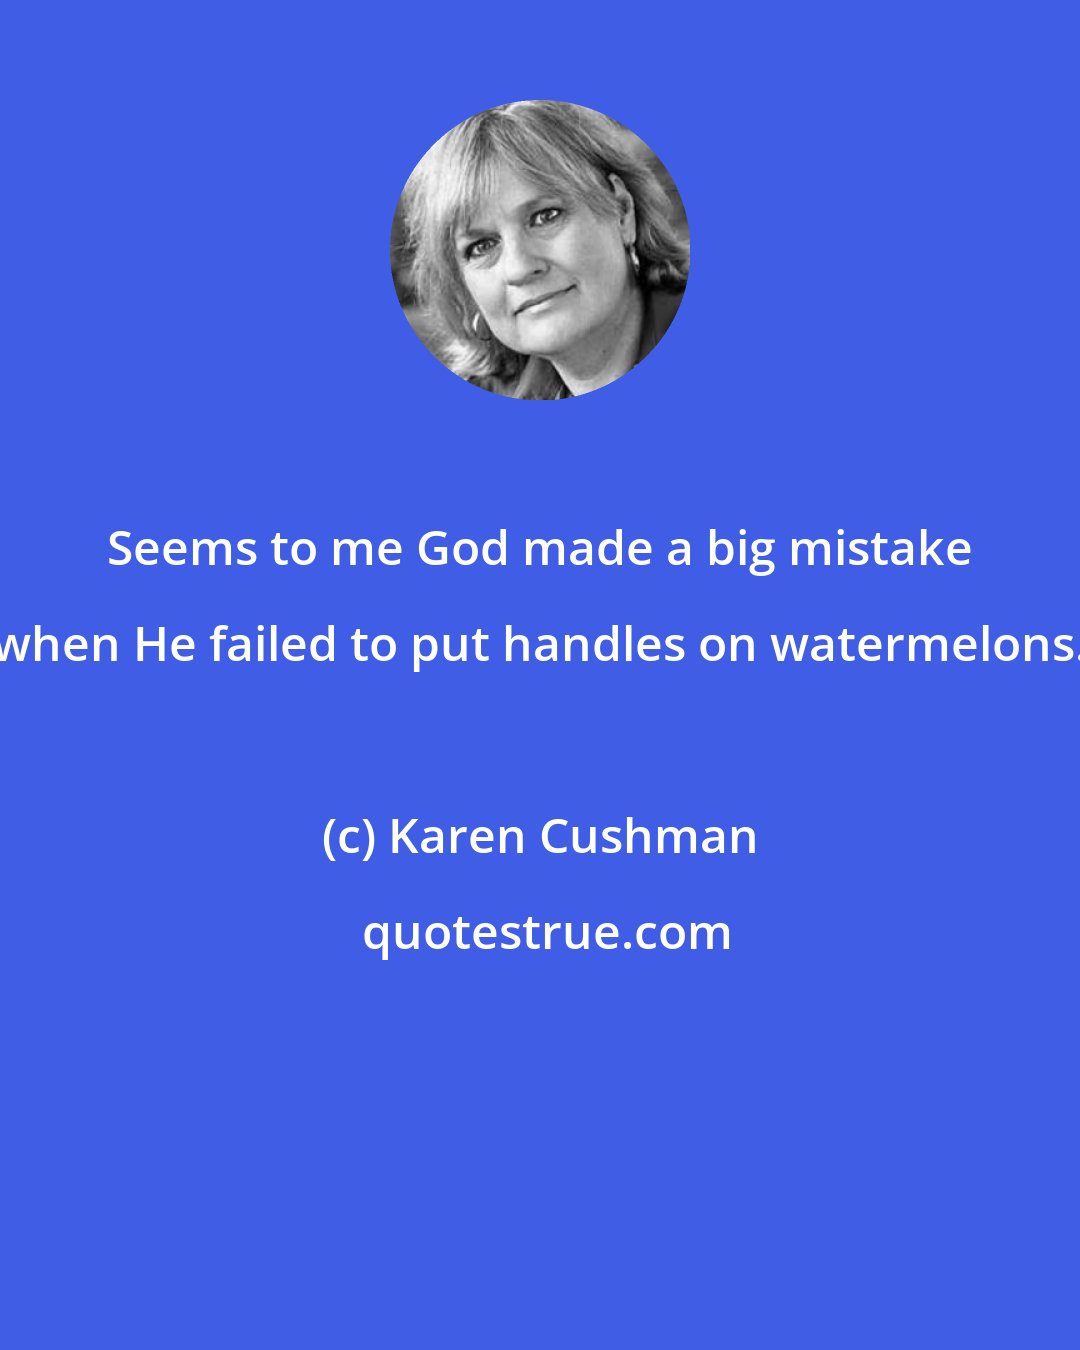 Karen Cushman: Seems to me God made a big mistake when He failed to put handles on watermelons.